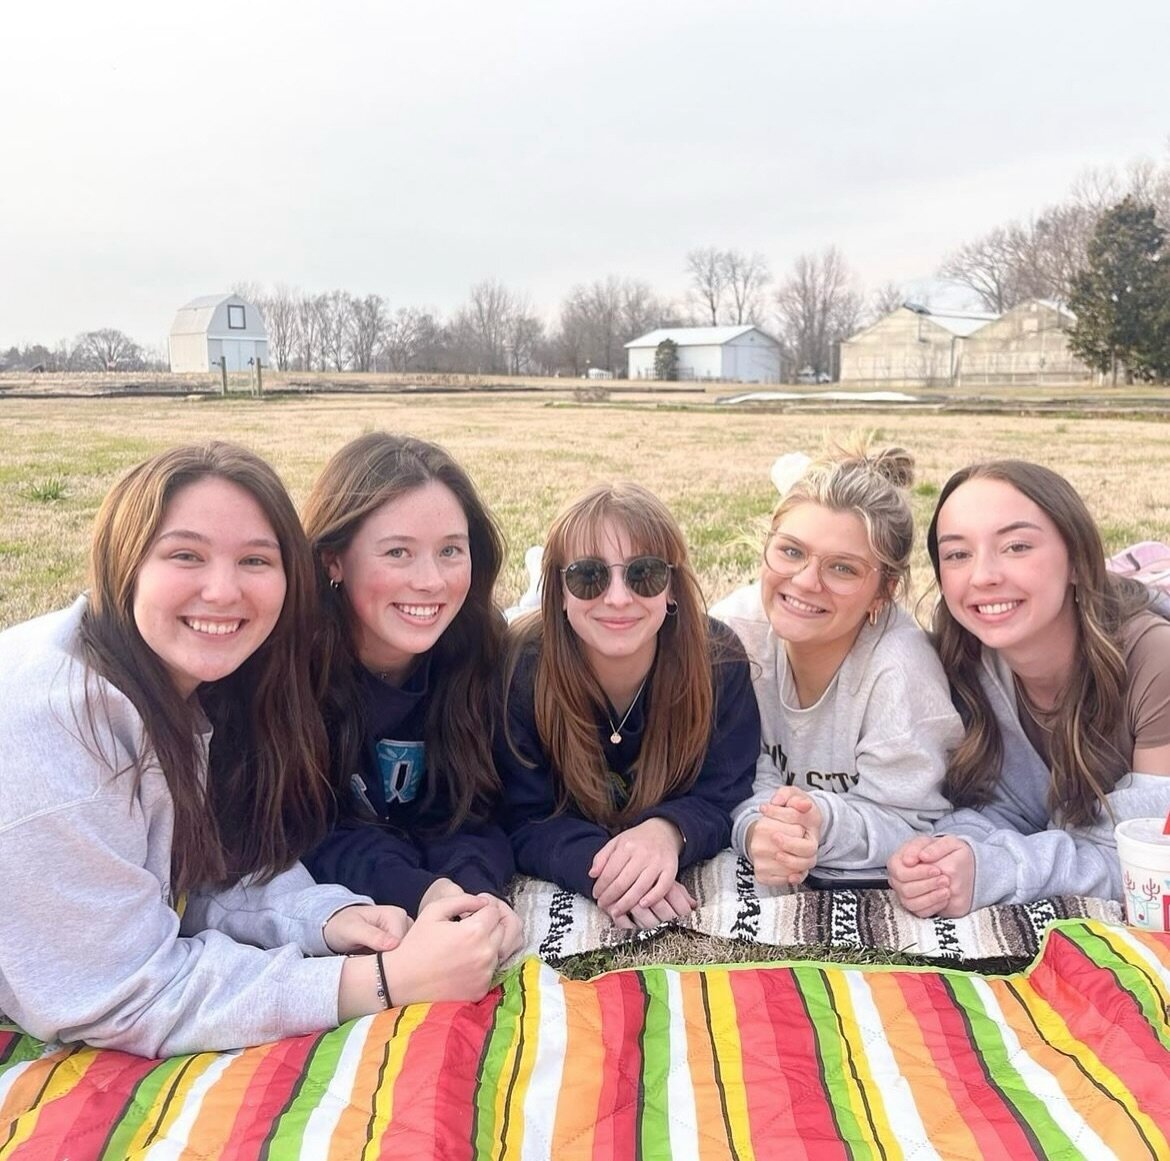 #FirstDayofSpring is better spent with your gal pals and sunshine ☀️ 🌷

📸: @panhellenicmurraystate 

#Springtime #SpringisHere #MurrayKY #MurrayKentucky